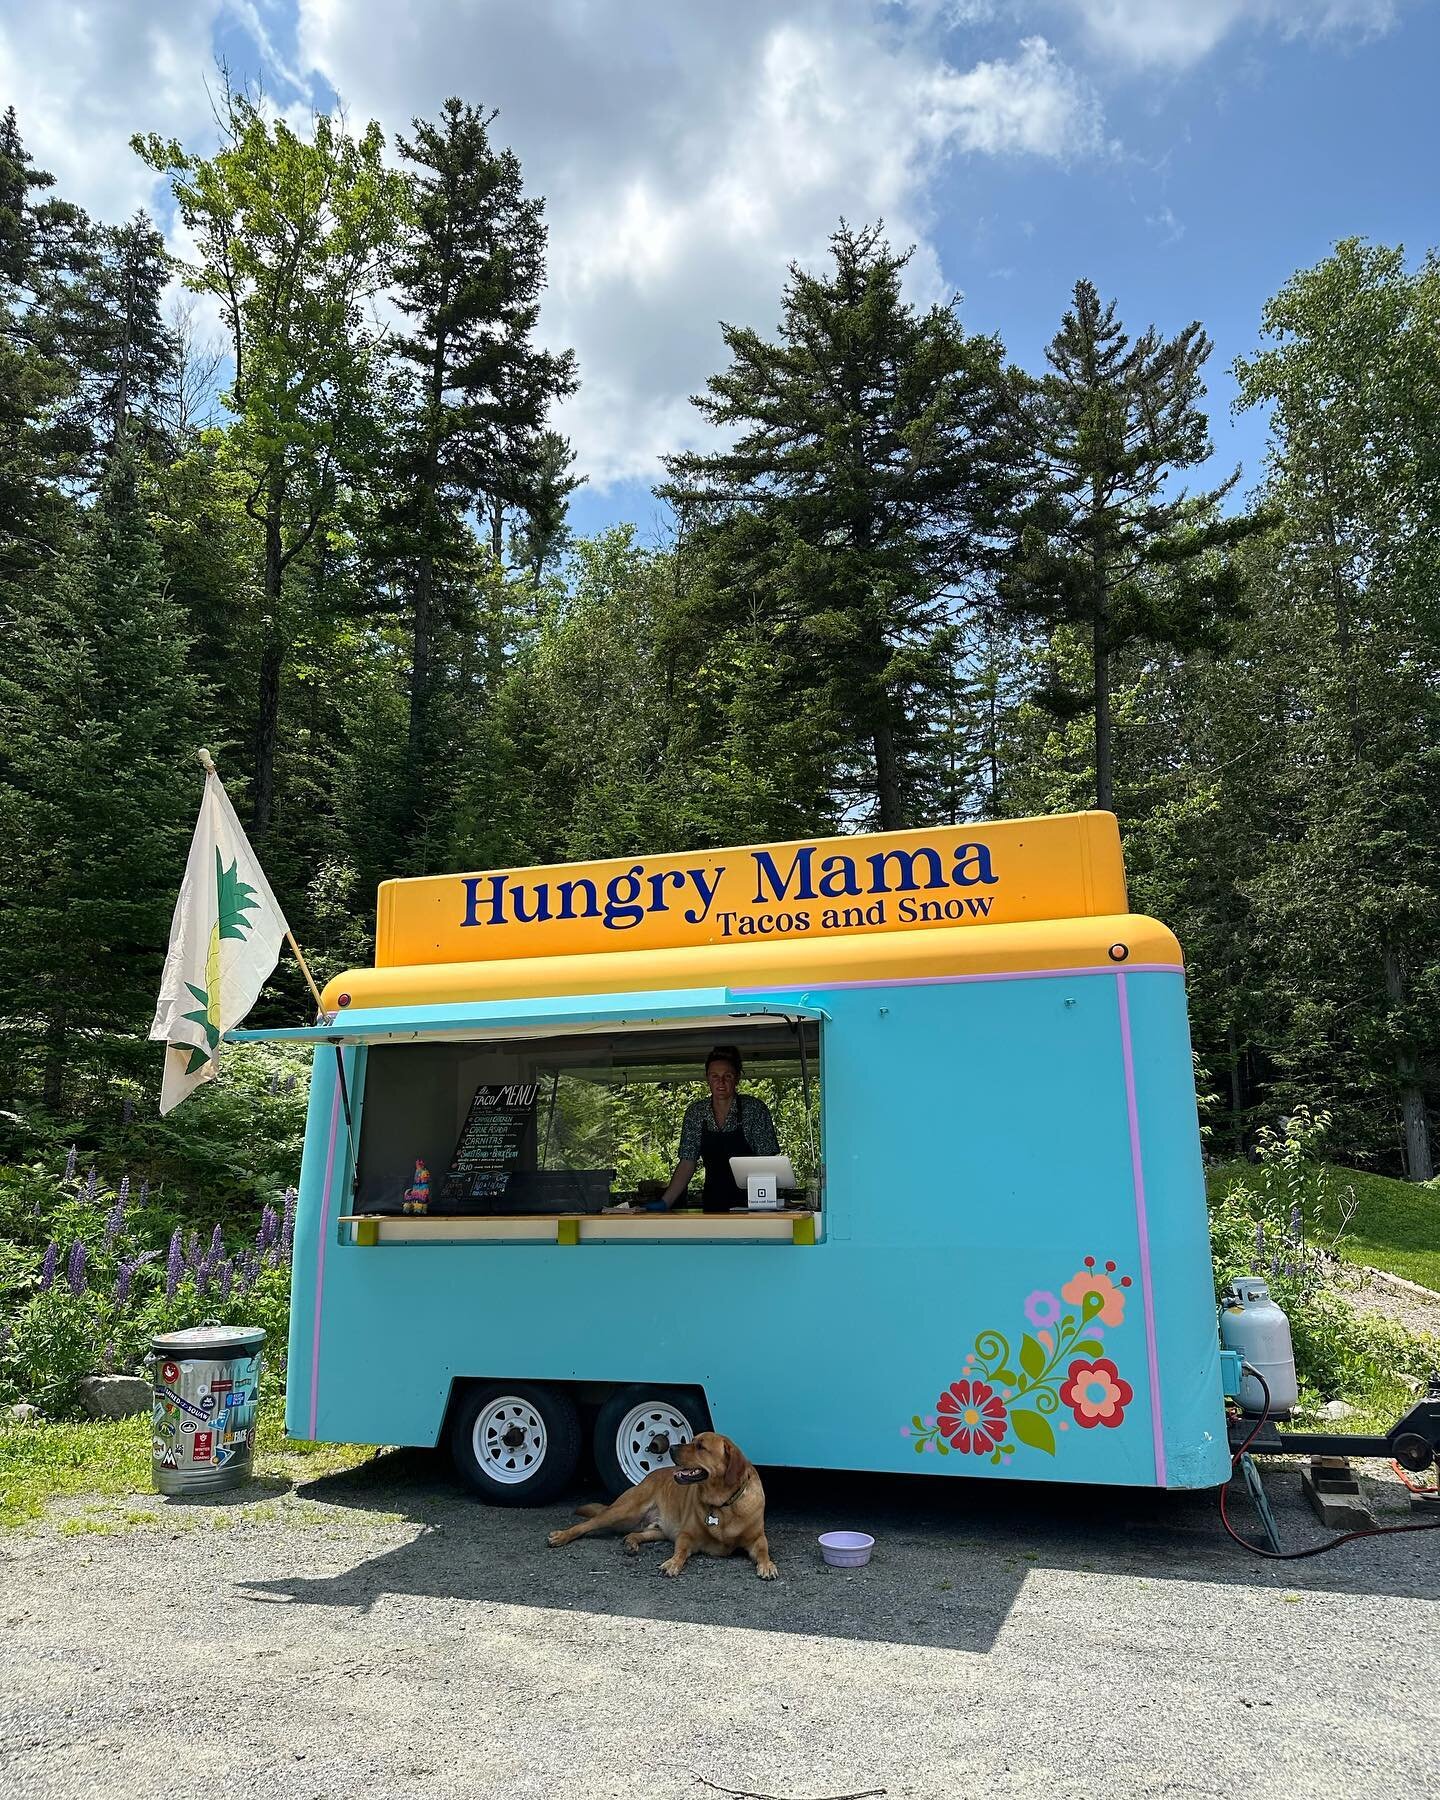 Our first Saturday fiesta was a success! Thank you to @hungrymama207 and all the people who came out to grab some grub. Missed the first one? Don&rsquo;t worry! She&rsquo;ll be back for round 2 next Saturday 11:30am-7pm! #tacotruck #foodtruck #hostel